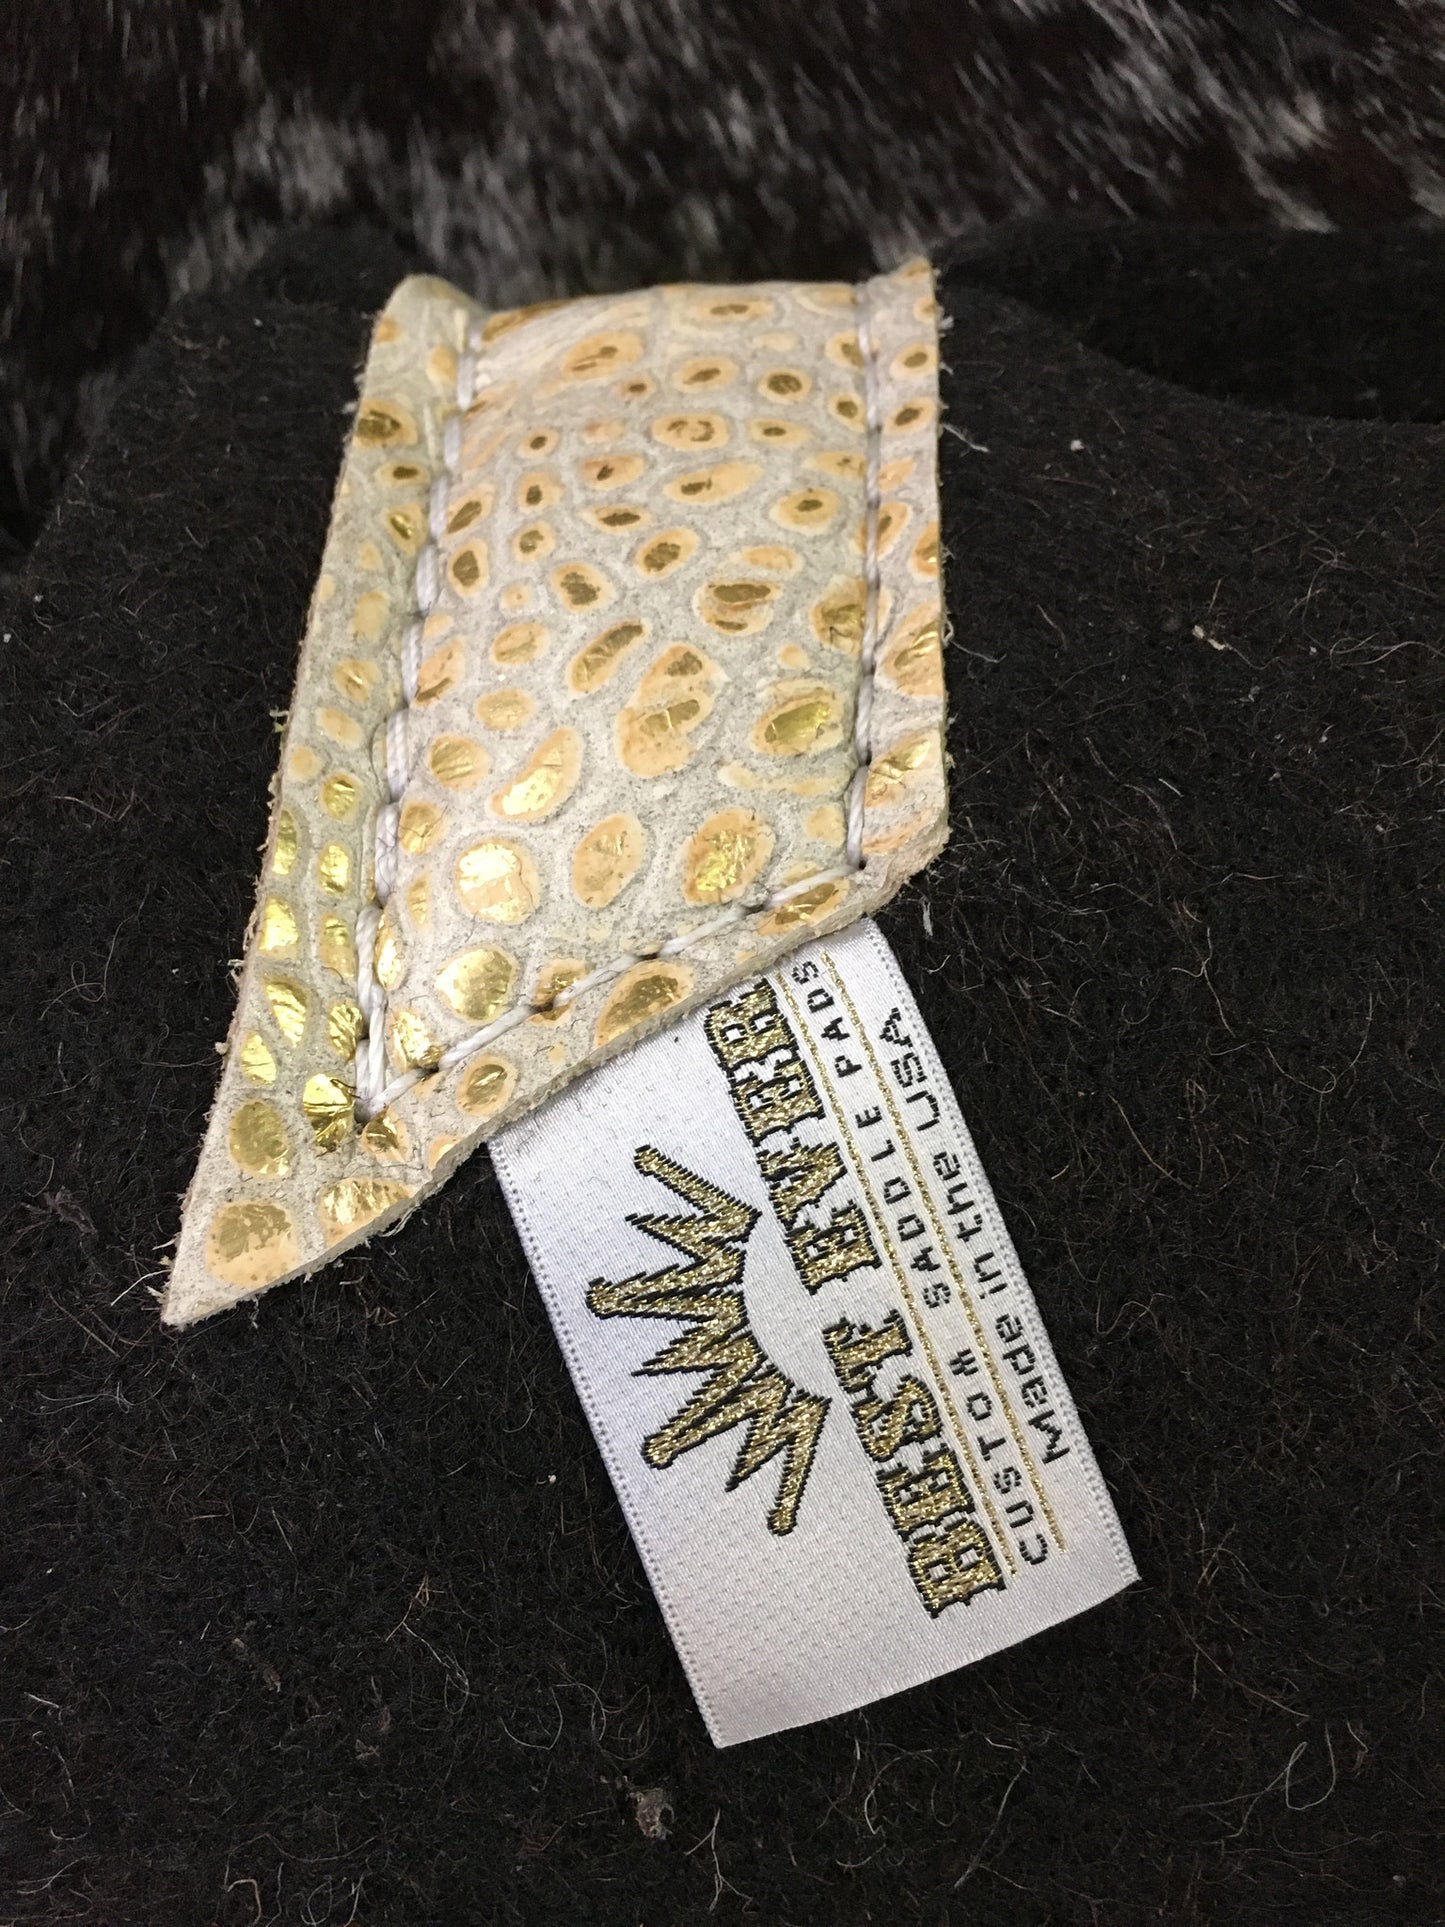 Best ever Saddle pad with cream/gold gator wear leathers